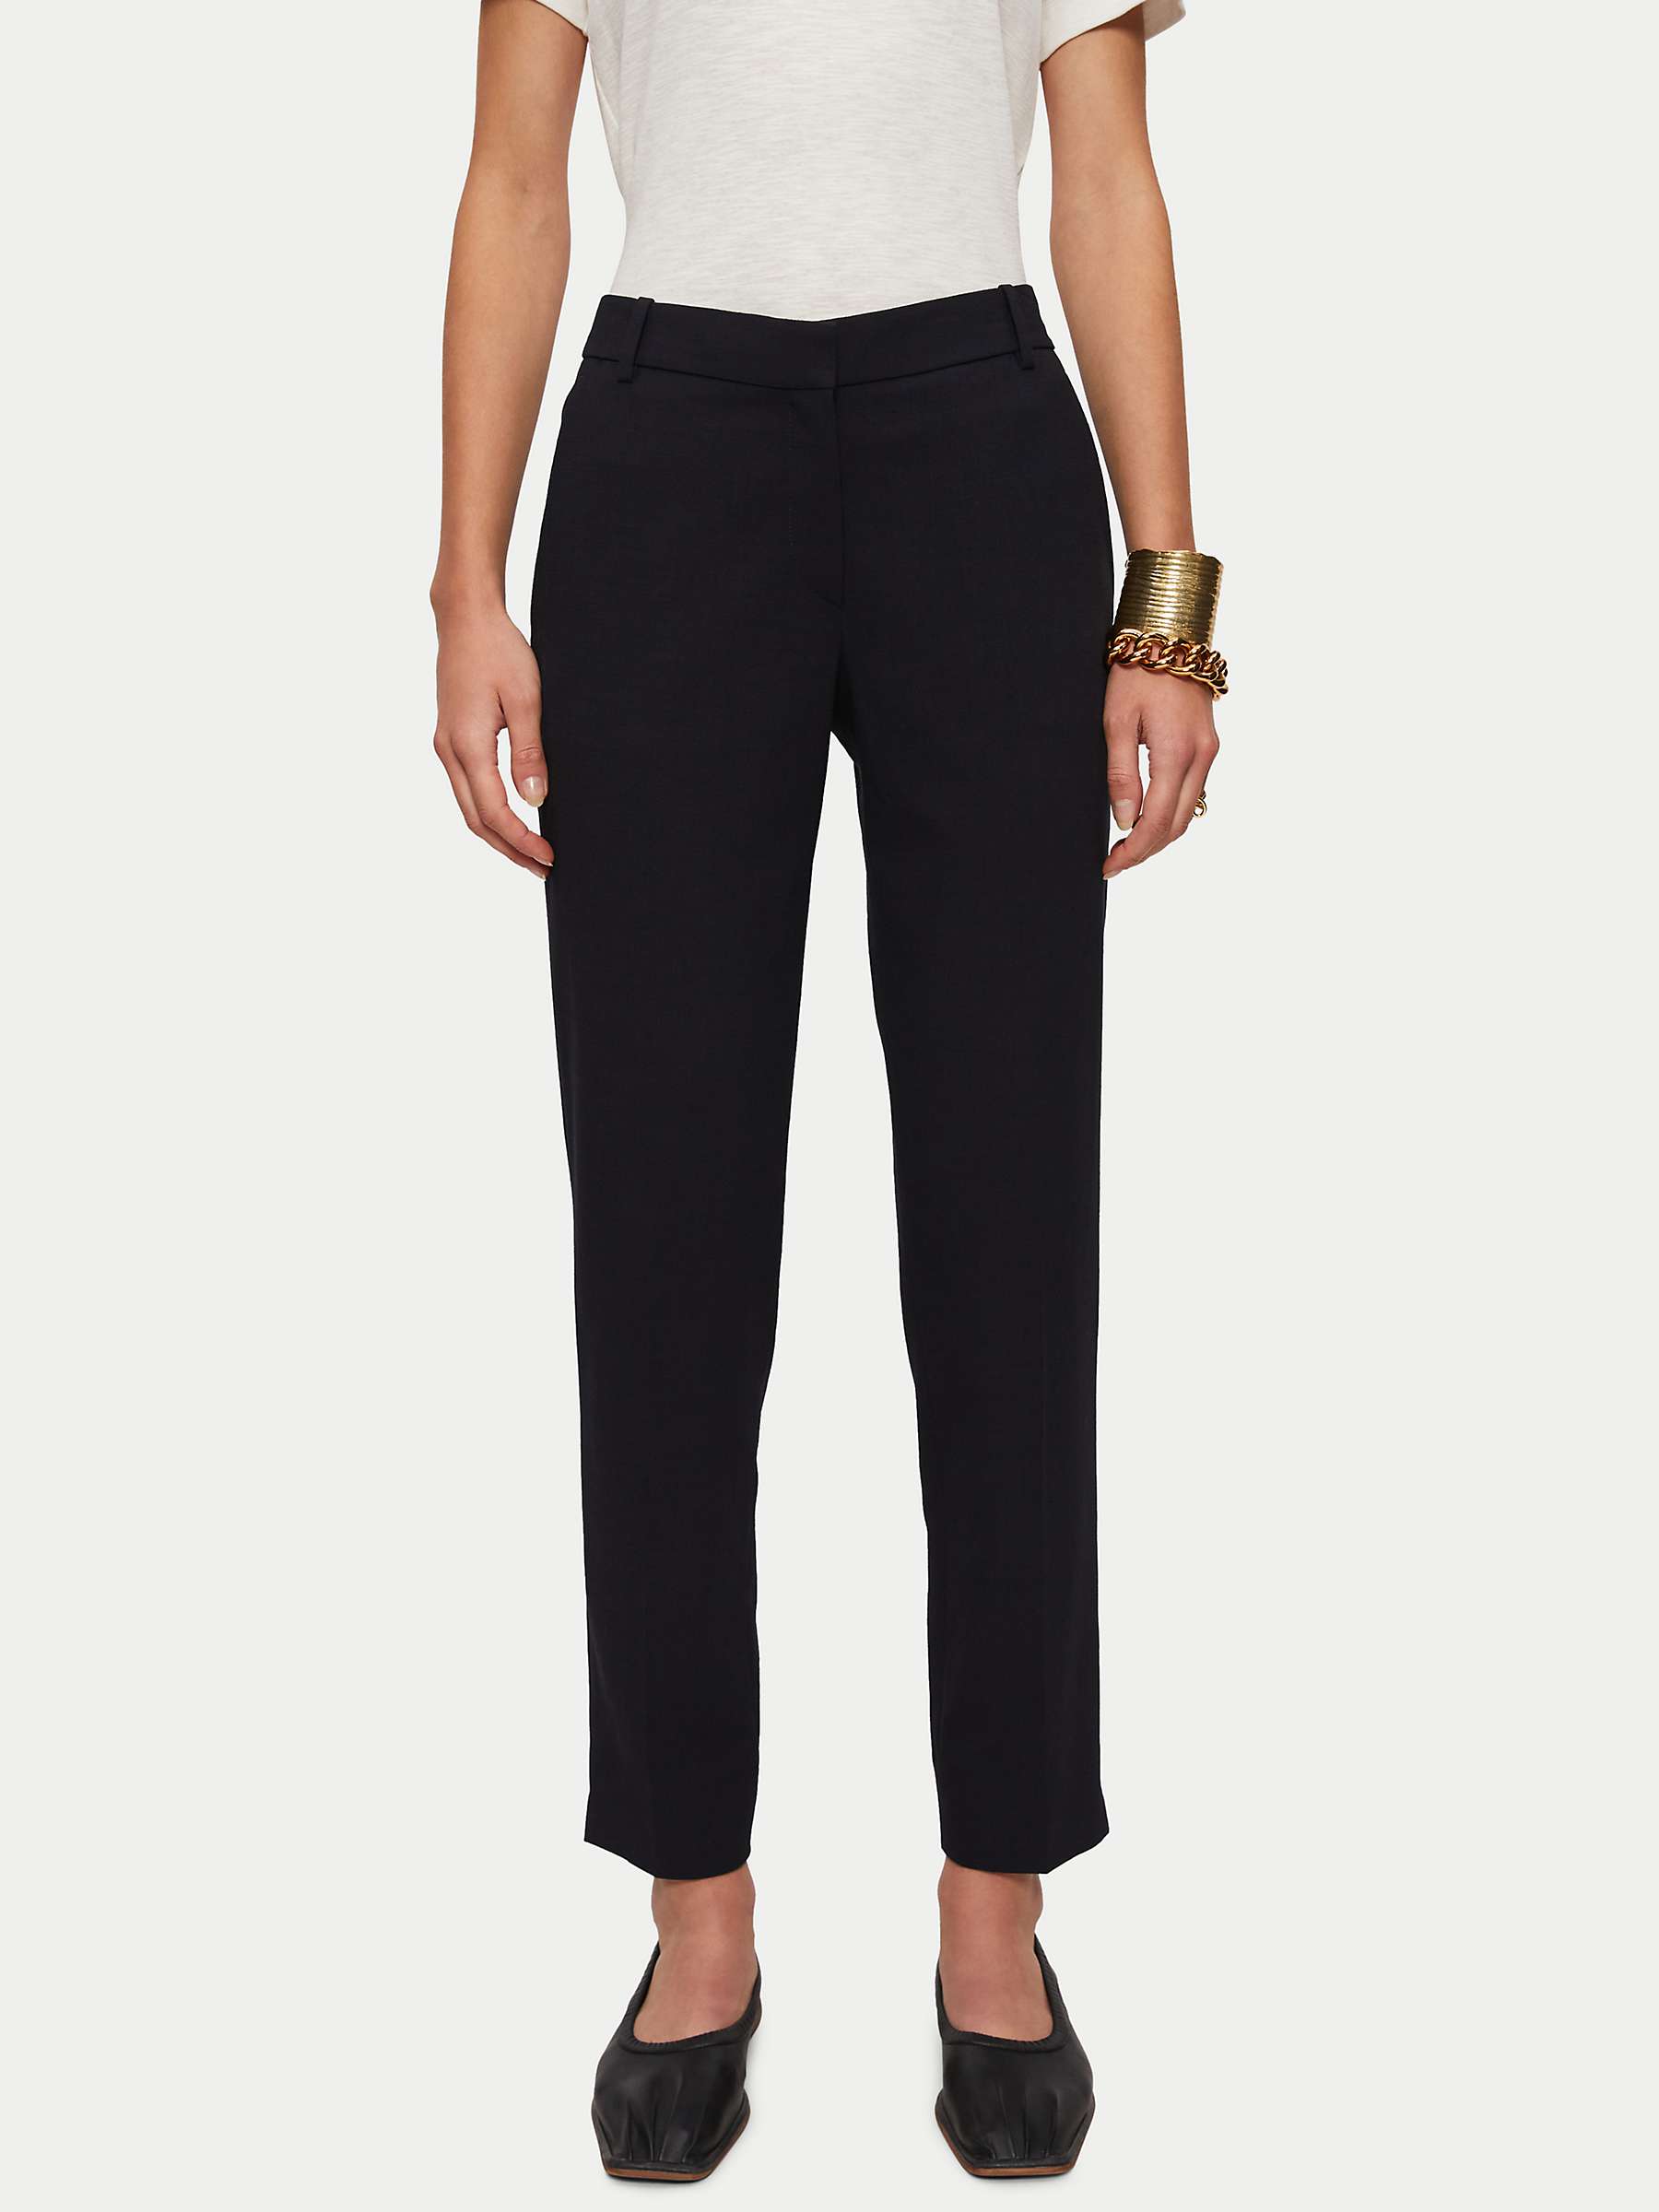 Buy Jigsaw Palmer Tailored Trousers, Navy Online at johnlewis.com